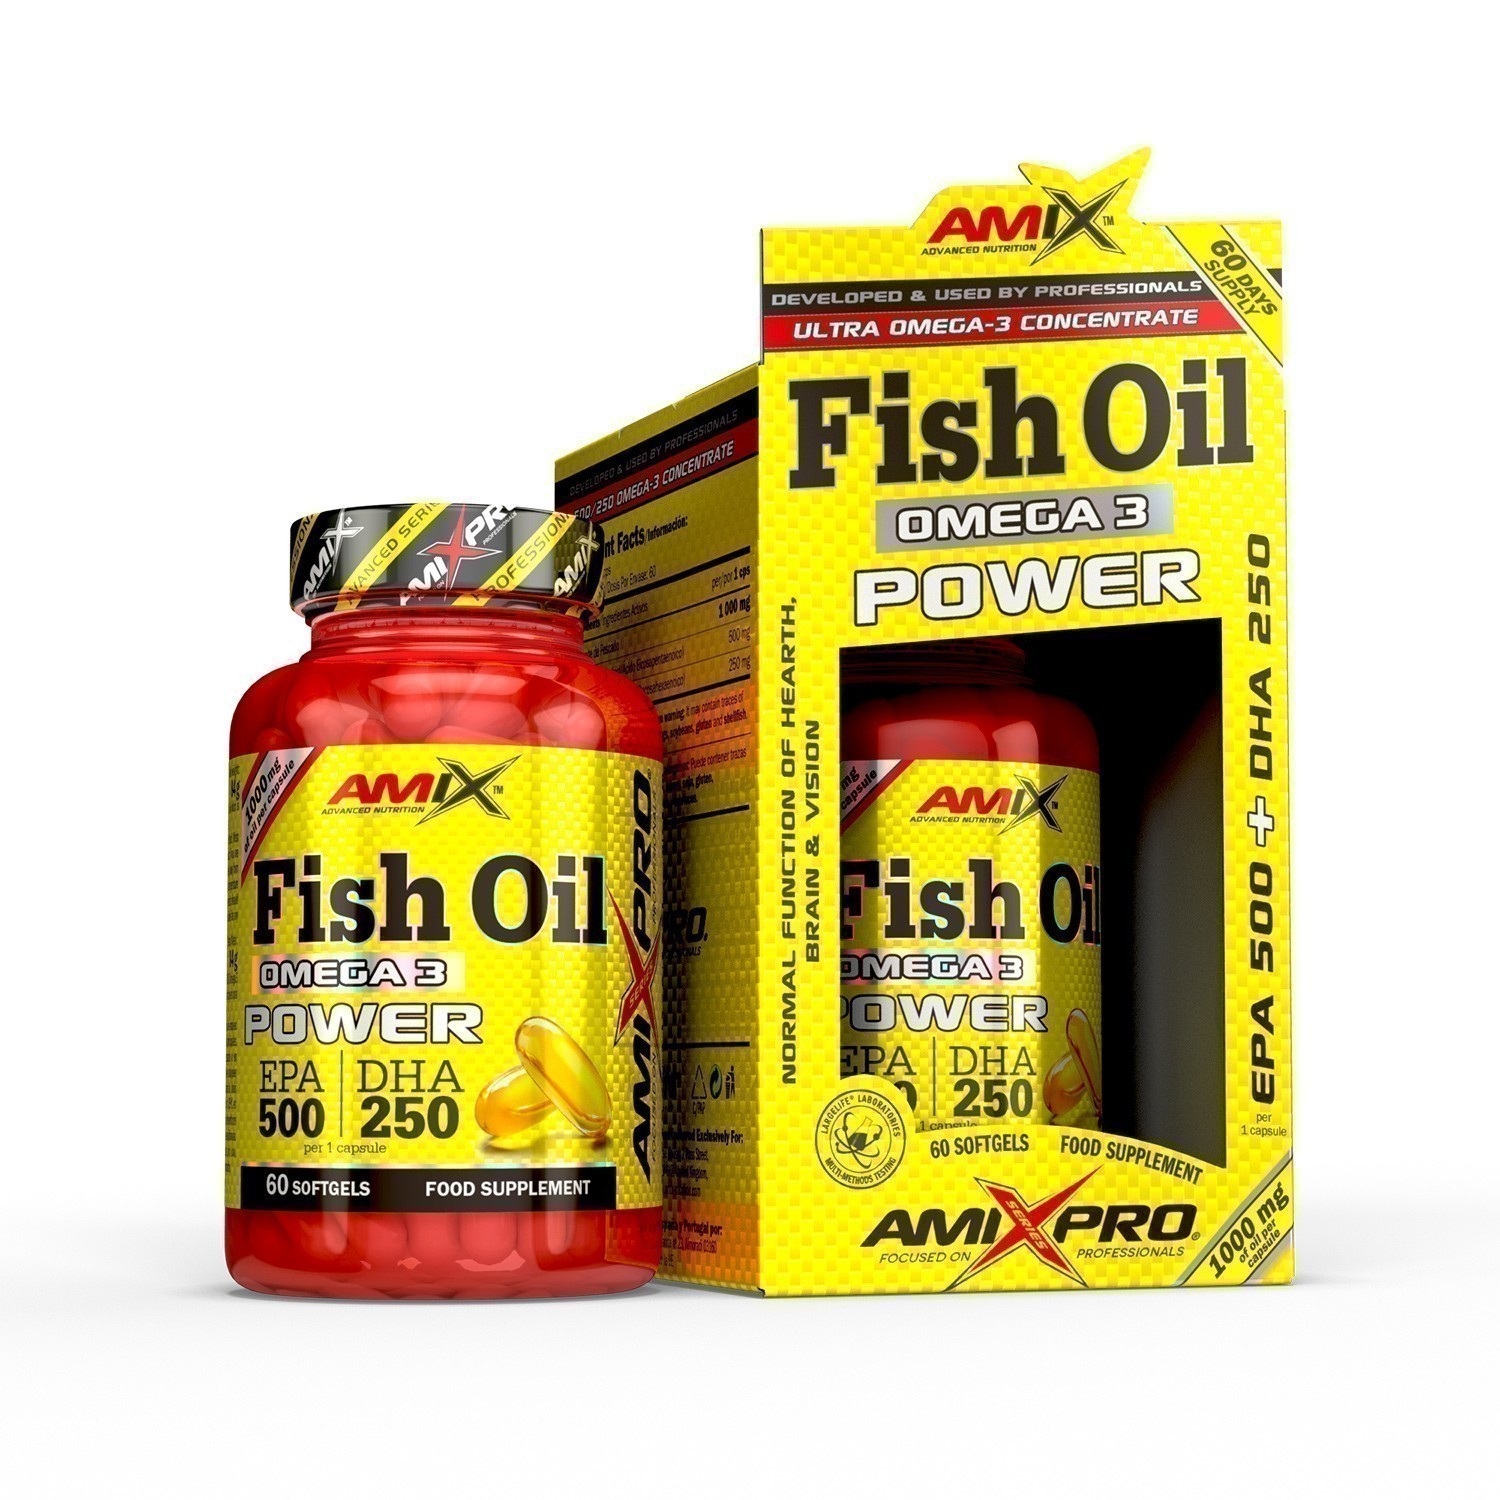 Amix Fish Oil Omega 3 Power, 60cps